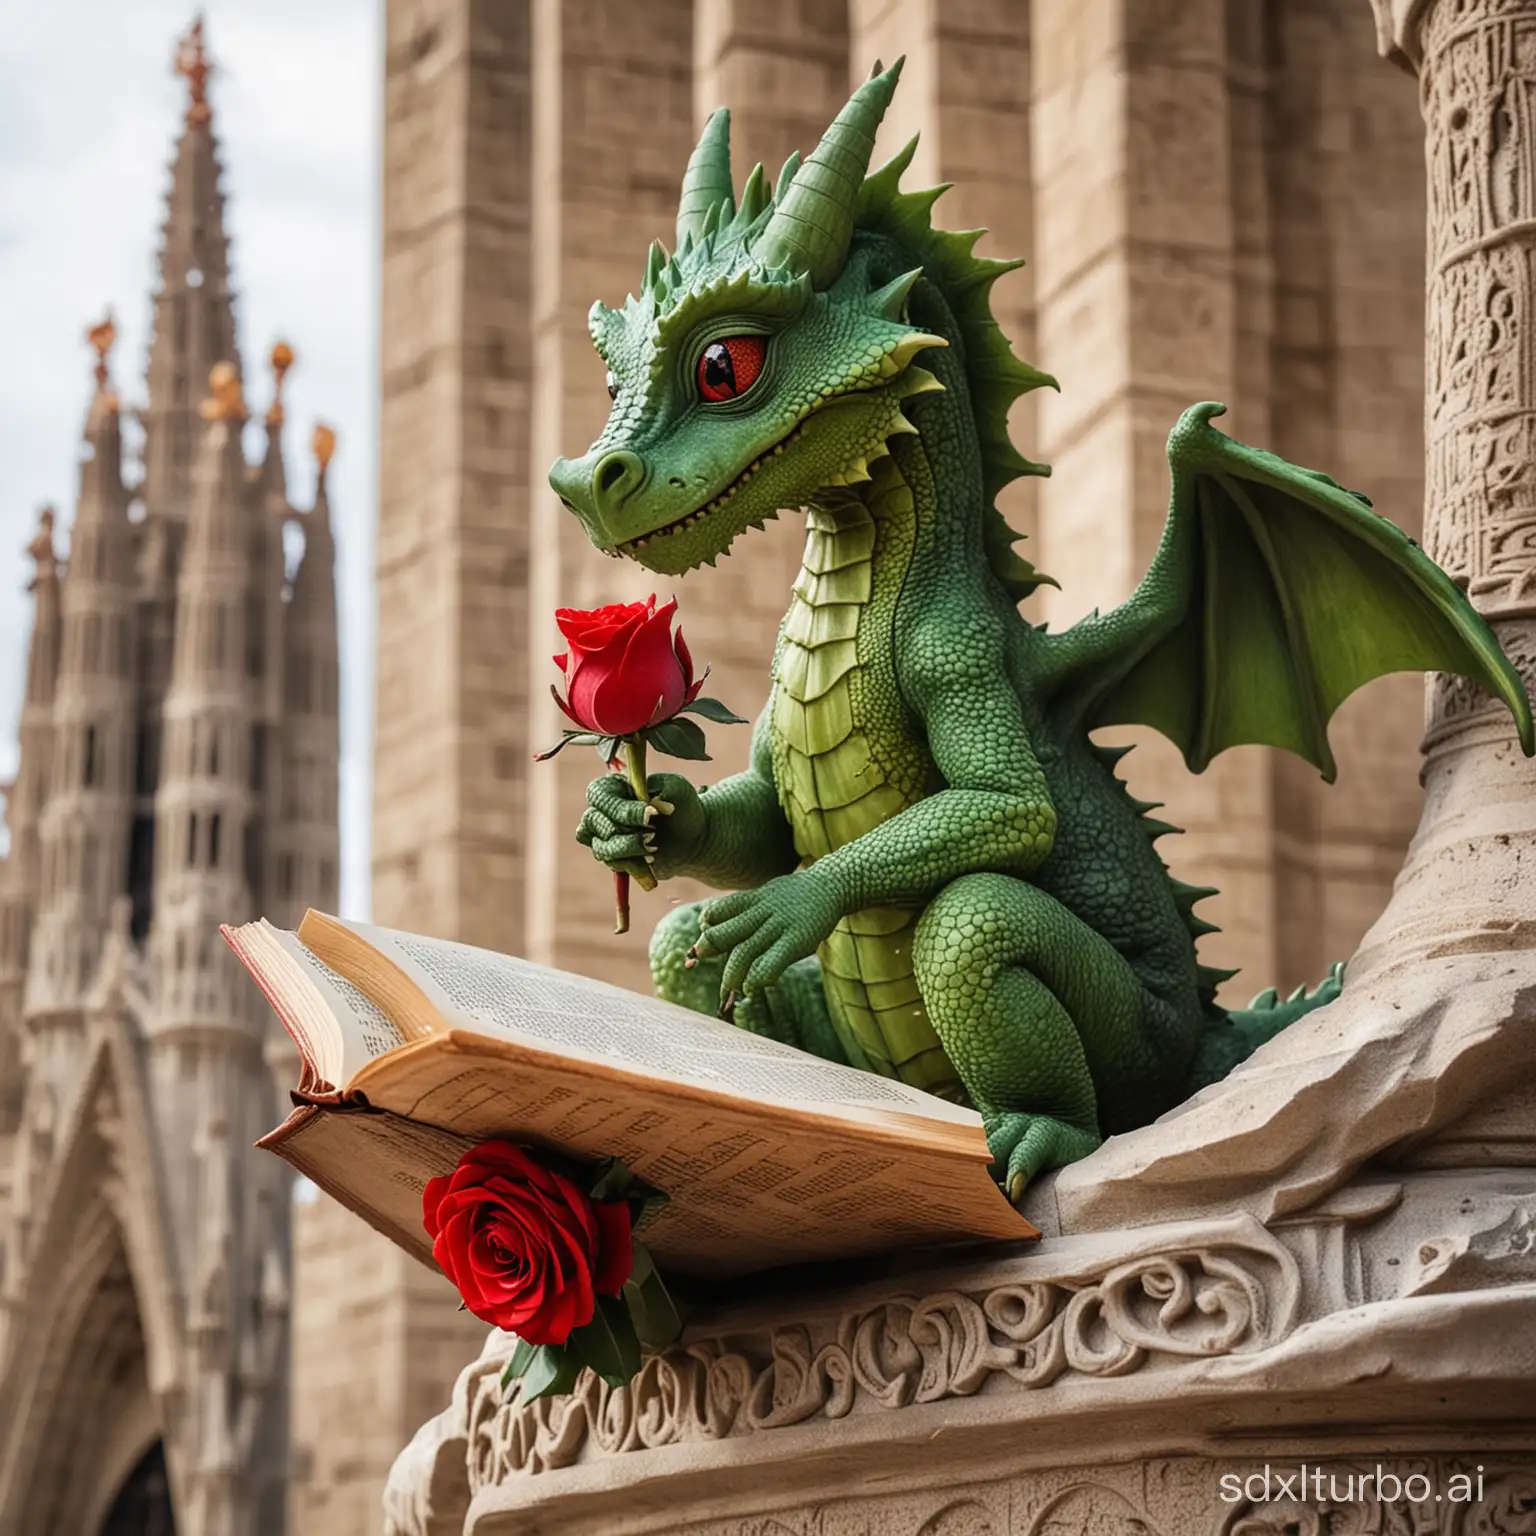 A small green dragon with a tender look reading an ancient book with a red rose in hand and sitting atop a tower of the Sagrada Familia monument in Barcelona